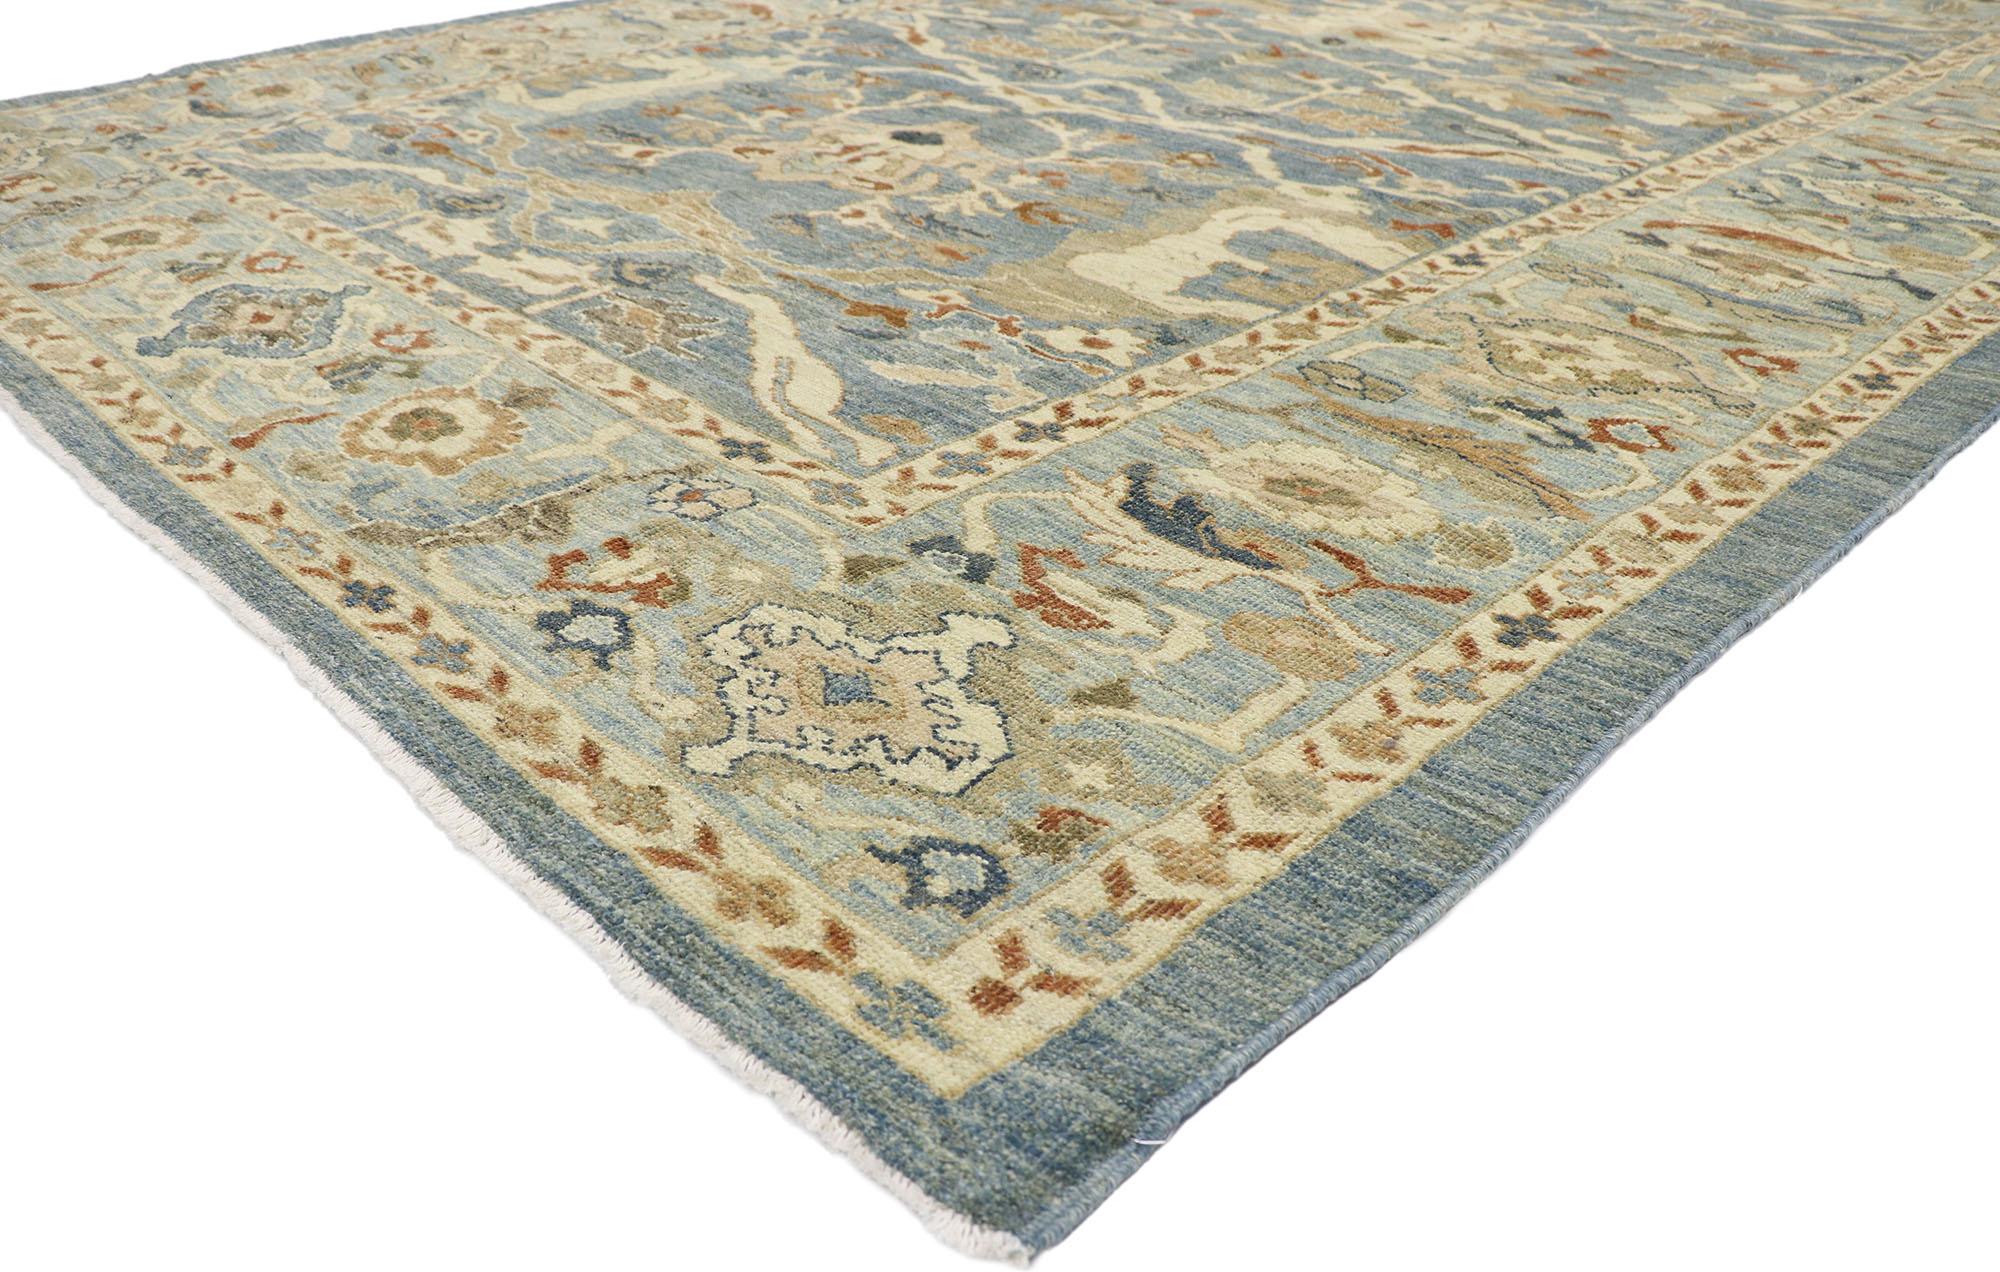 60900 New Contemporary Persian Sultanabad Rug from Turkey, 09'00 x 12'02. Turkish Sultanabad rugs, originating from Turkey and inspired by Persian Sultanabad designs, are celebrated for their superb craftsmanship, intricate patterns, and vibrant